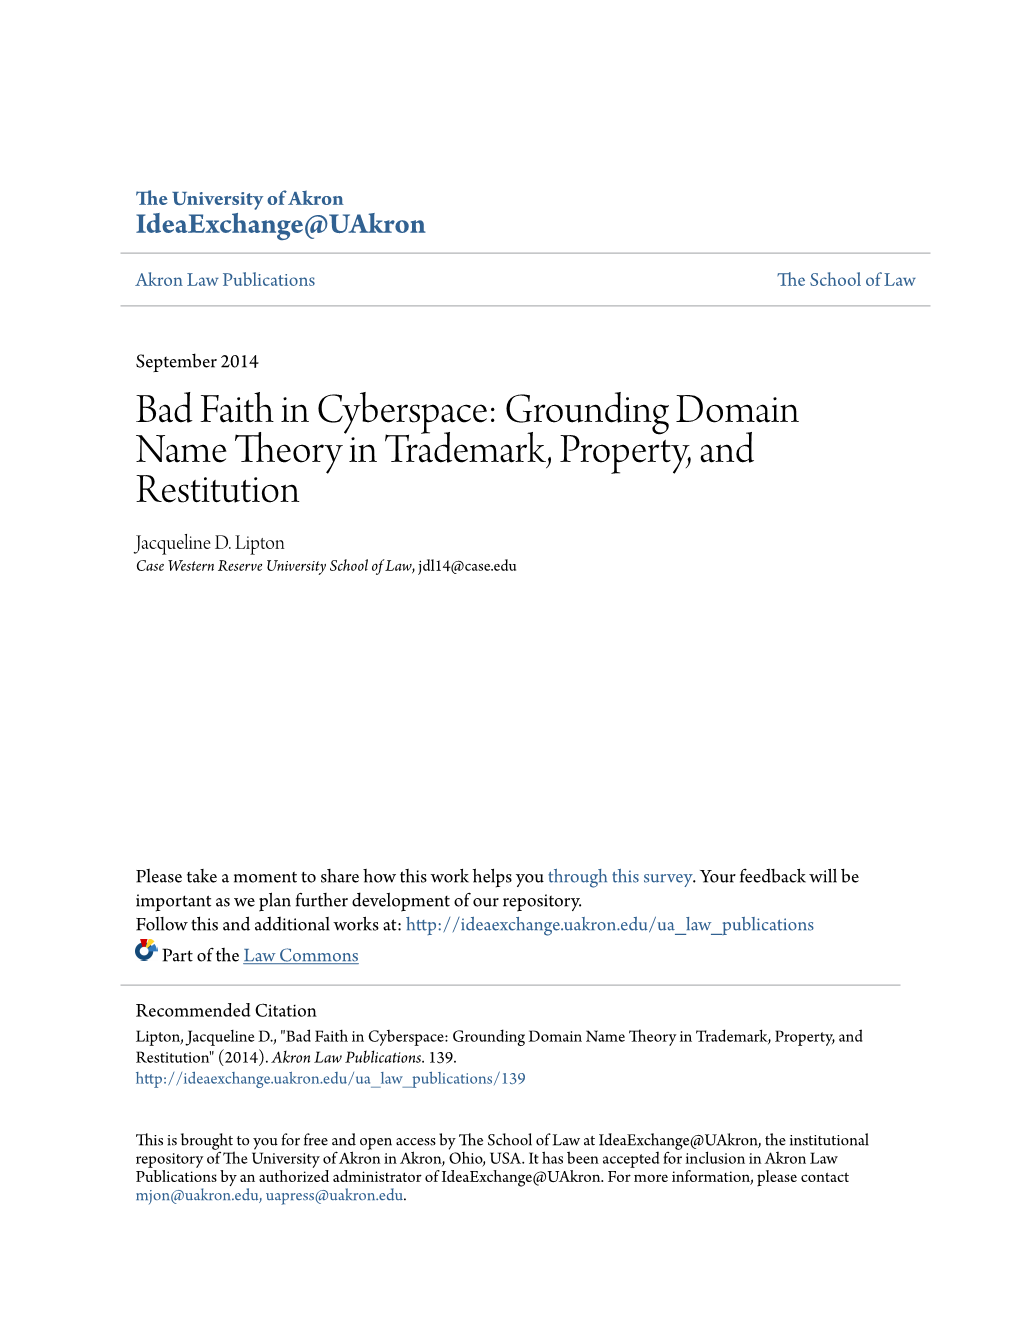 Bad Faith in Cyberspace: Grounding Domain Name Theory in Trademark, Property, and Restitution Jacqueline D